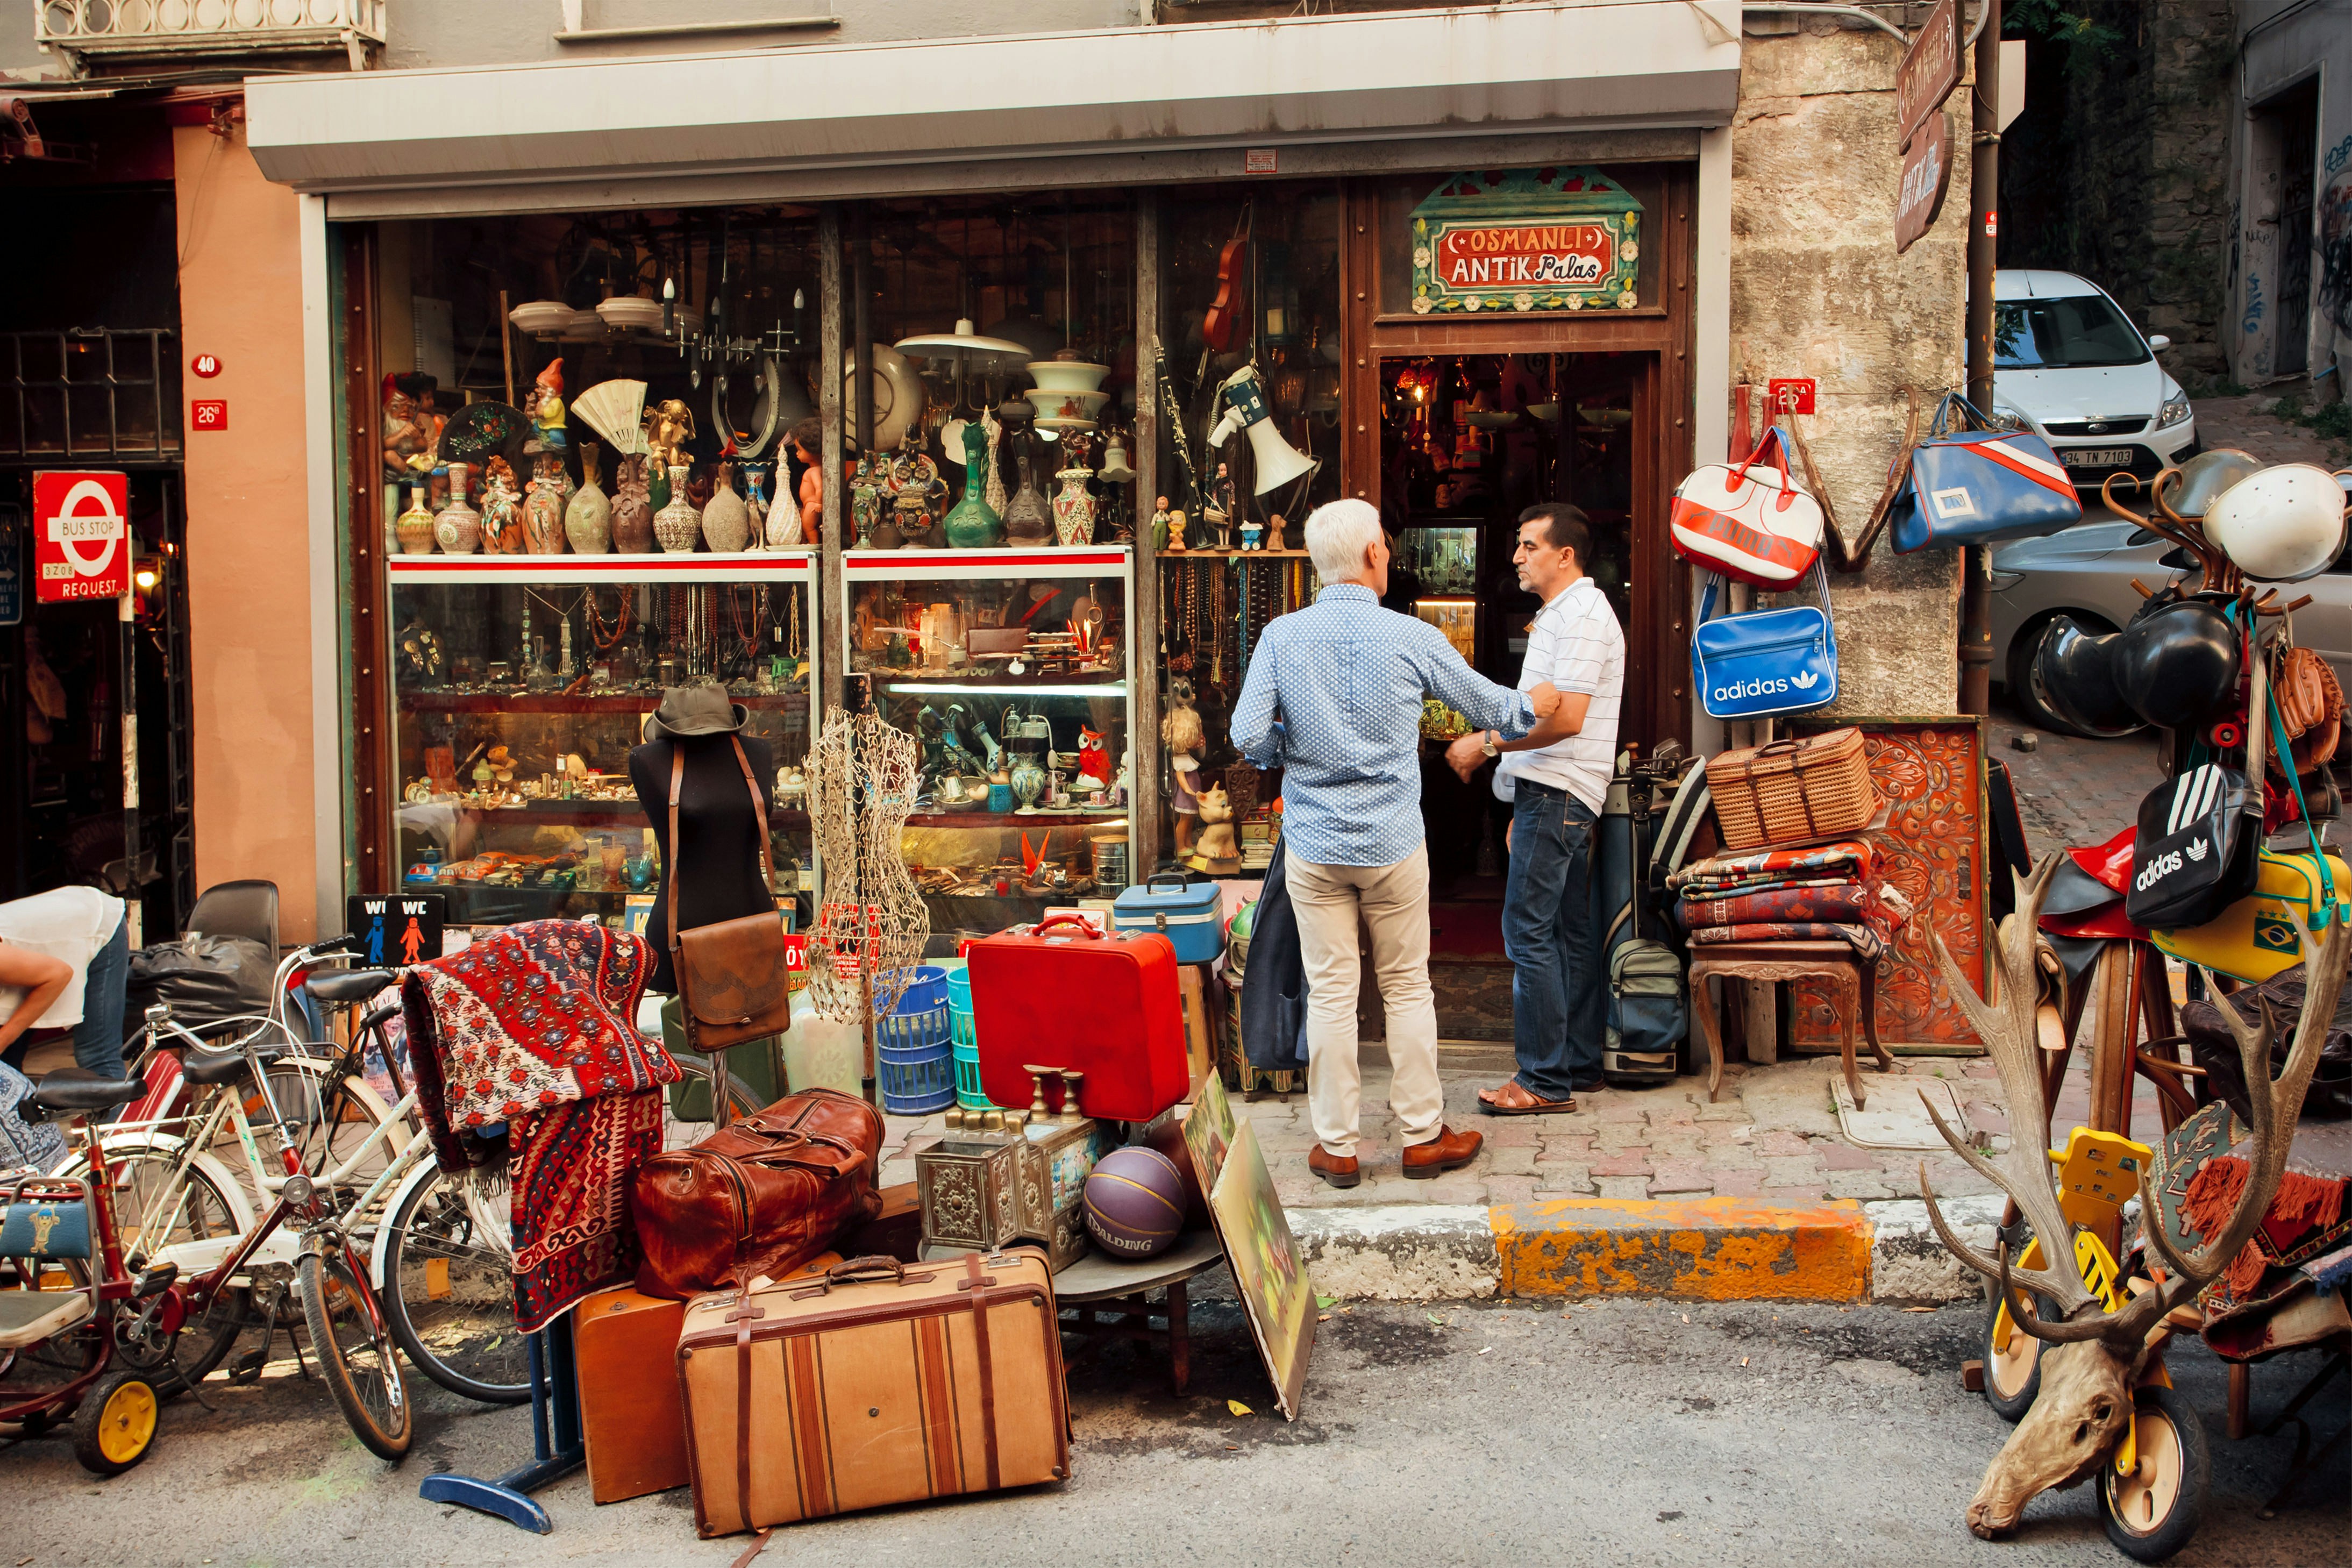 Two men are chatting in the doorway of an antiques shop in Çukurcuma, Istanbul. The pavement outside is piled high with various goods, from suitcases to bicycles. 